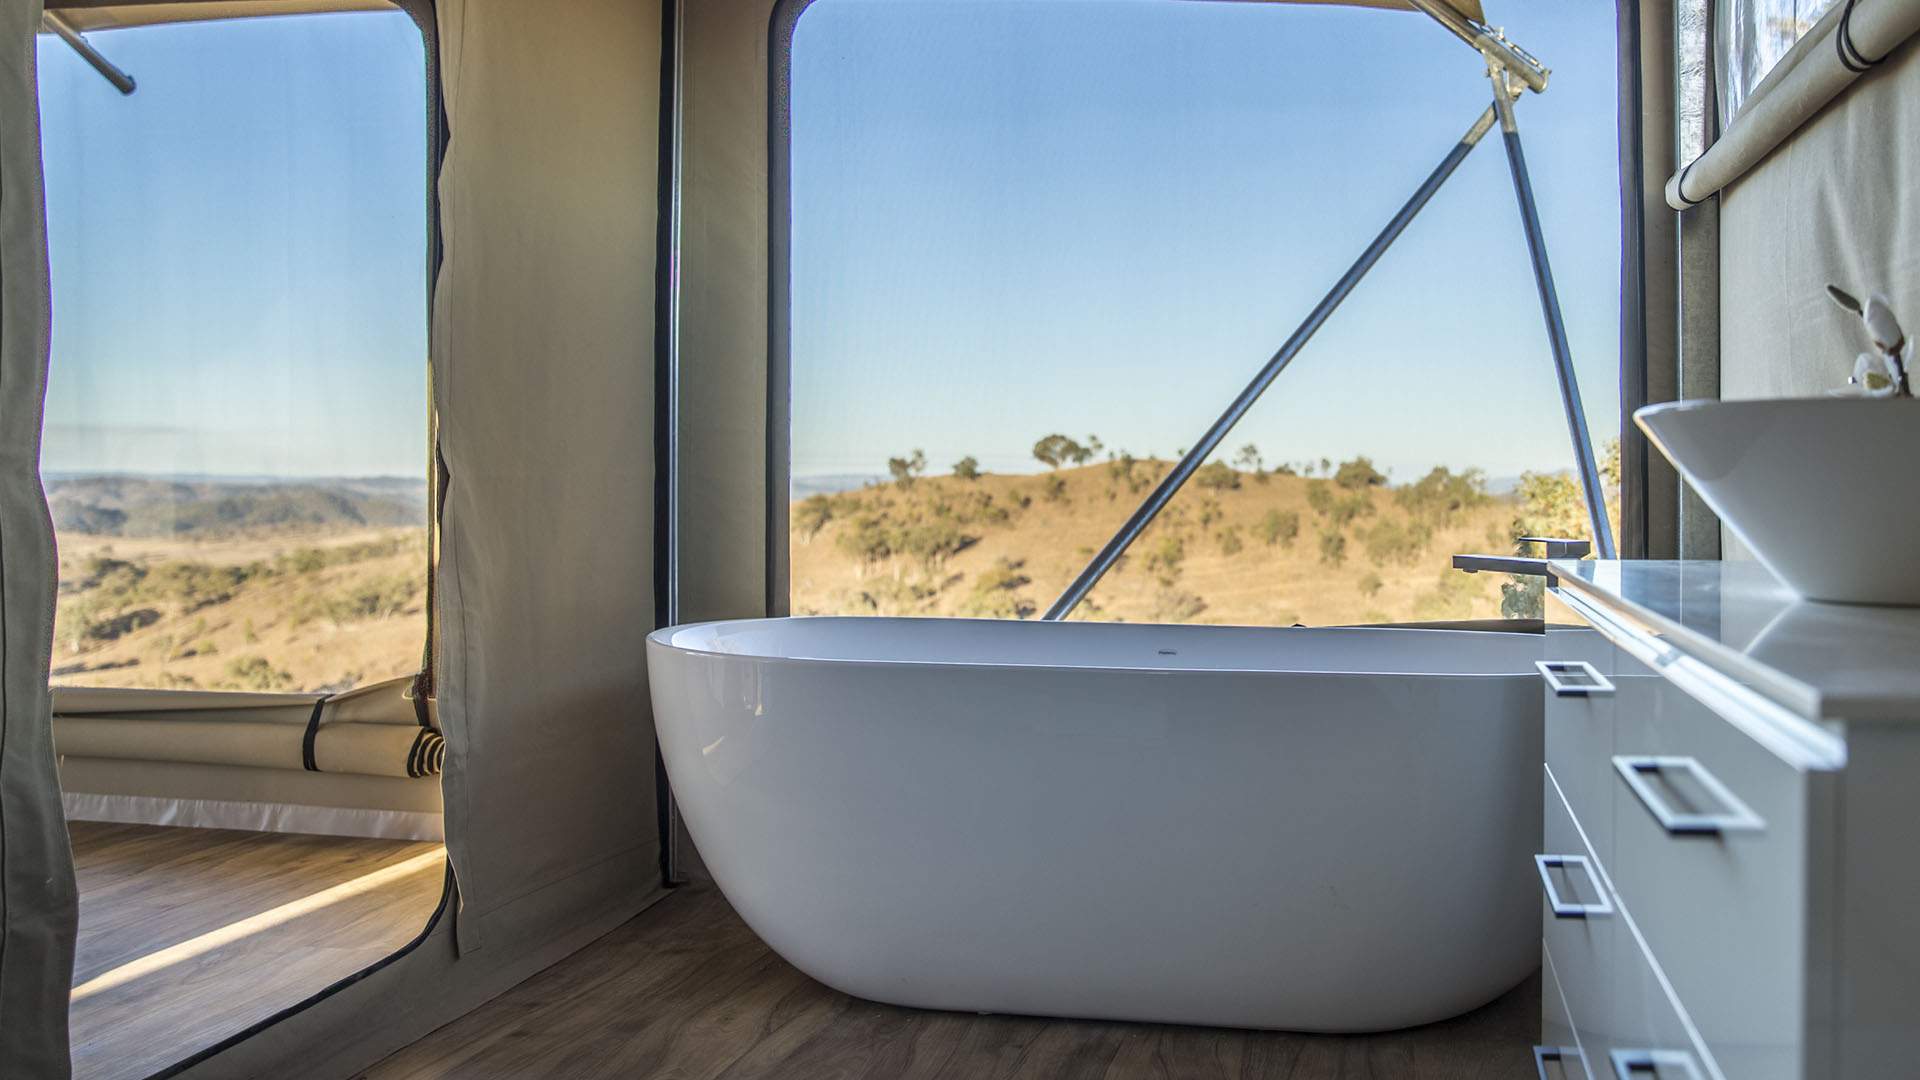 Mudgee's Luxe Hillside Glamping Retreat Has Expanded